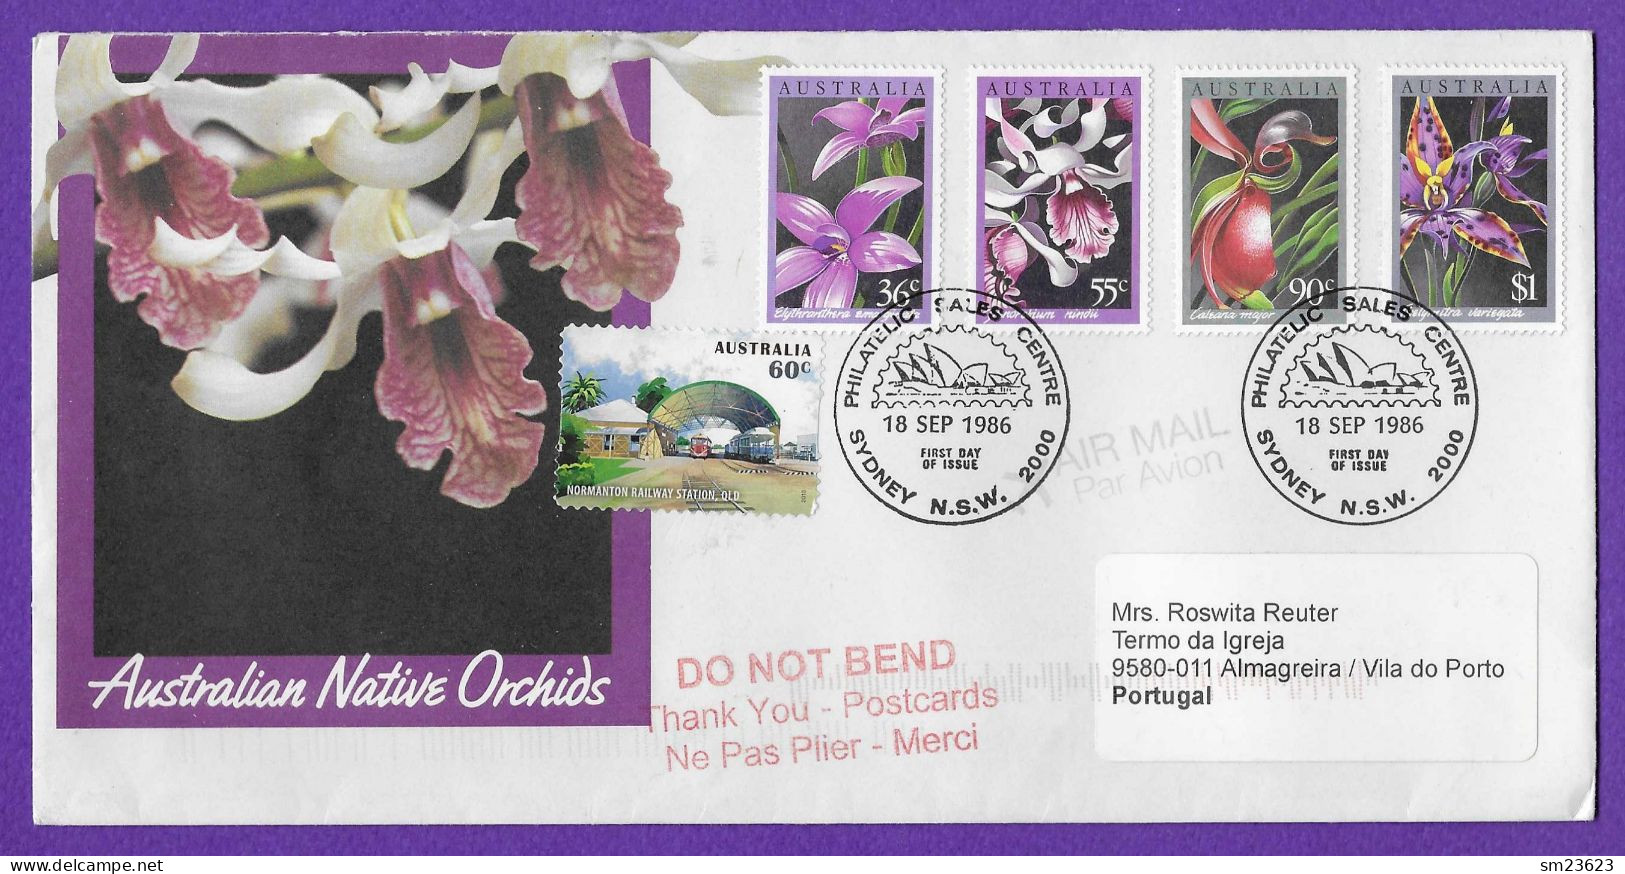 Australien 1986  Mi.Nr. 997 / 1000 , Orchideen - First Day Of Issue 18 SEP 1986 - FDC